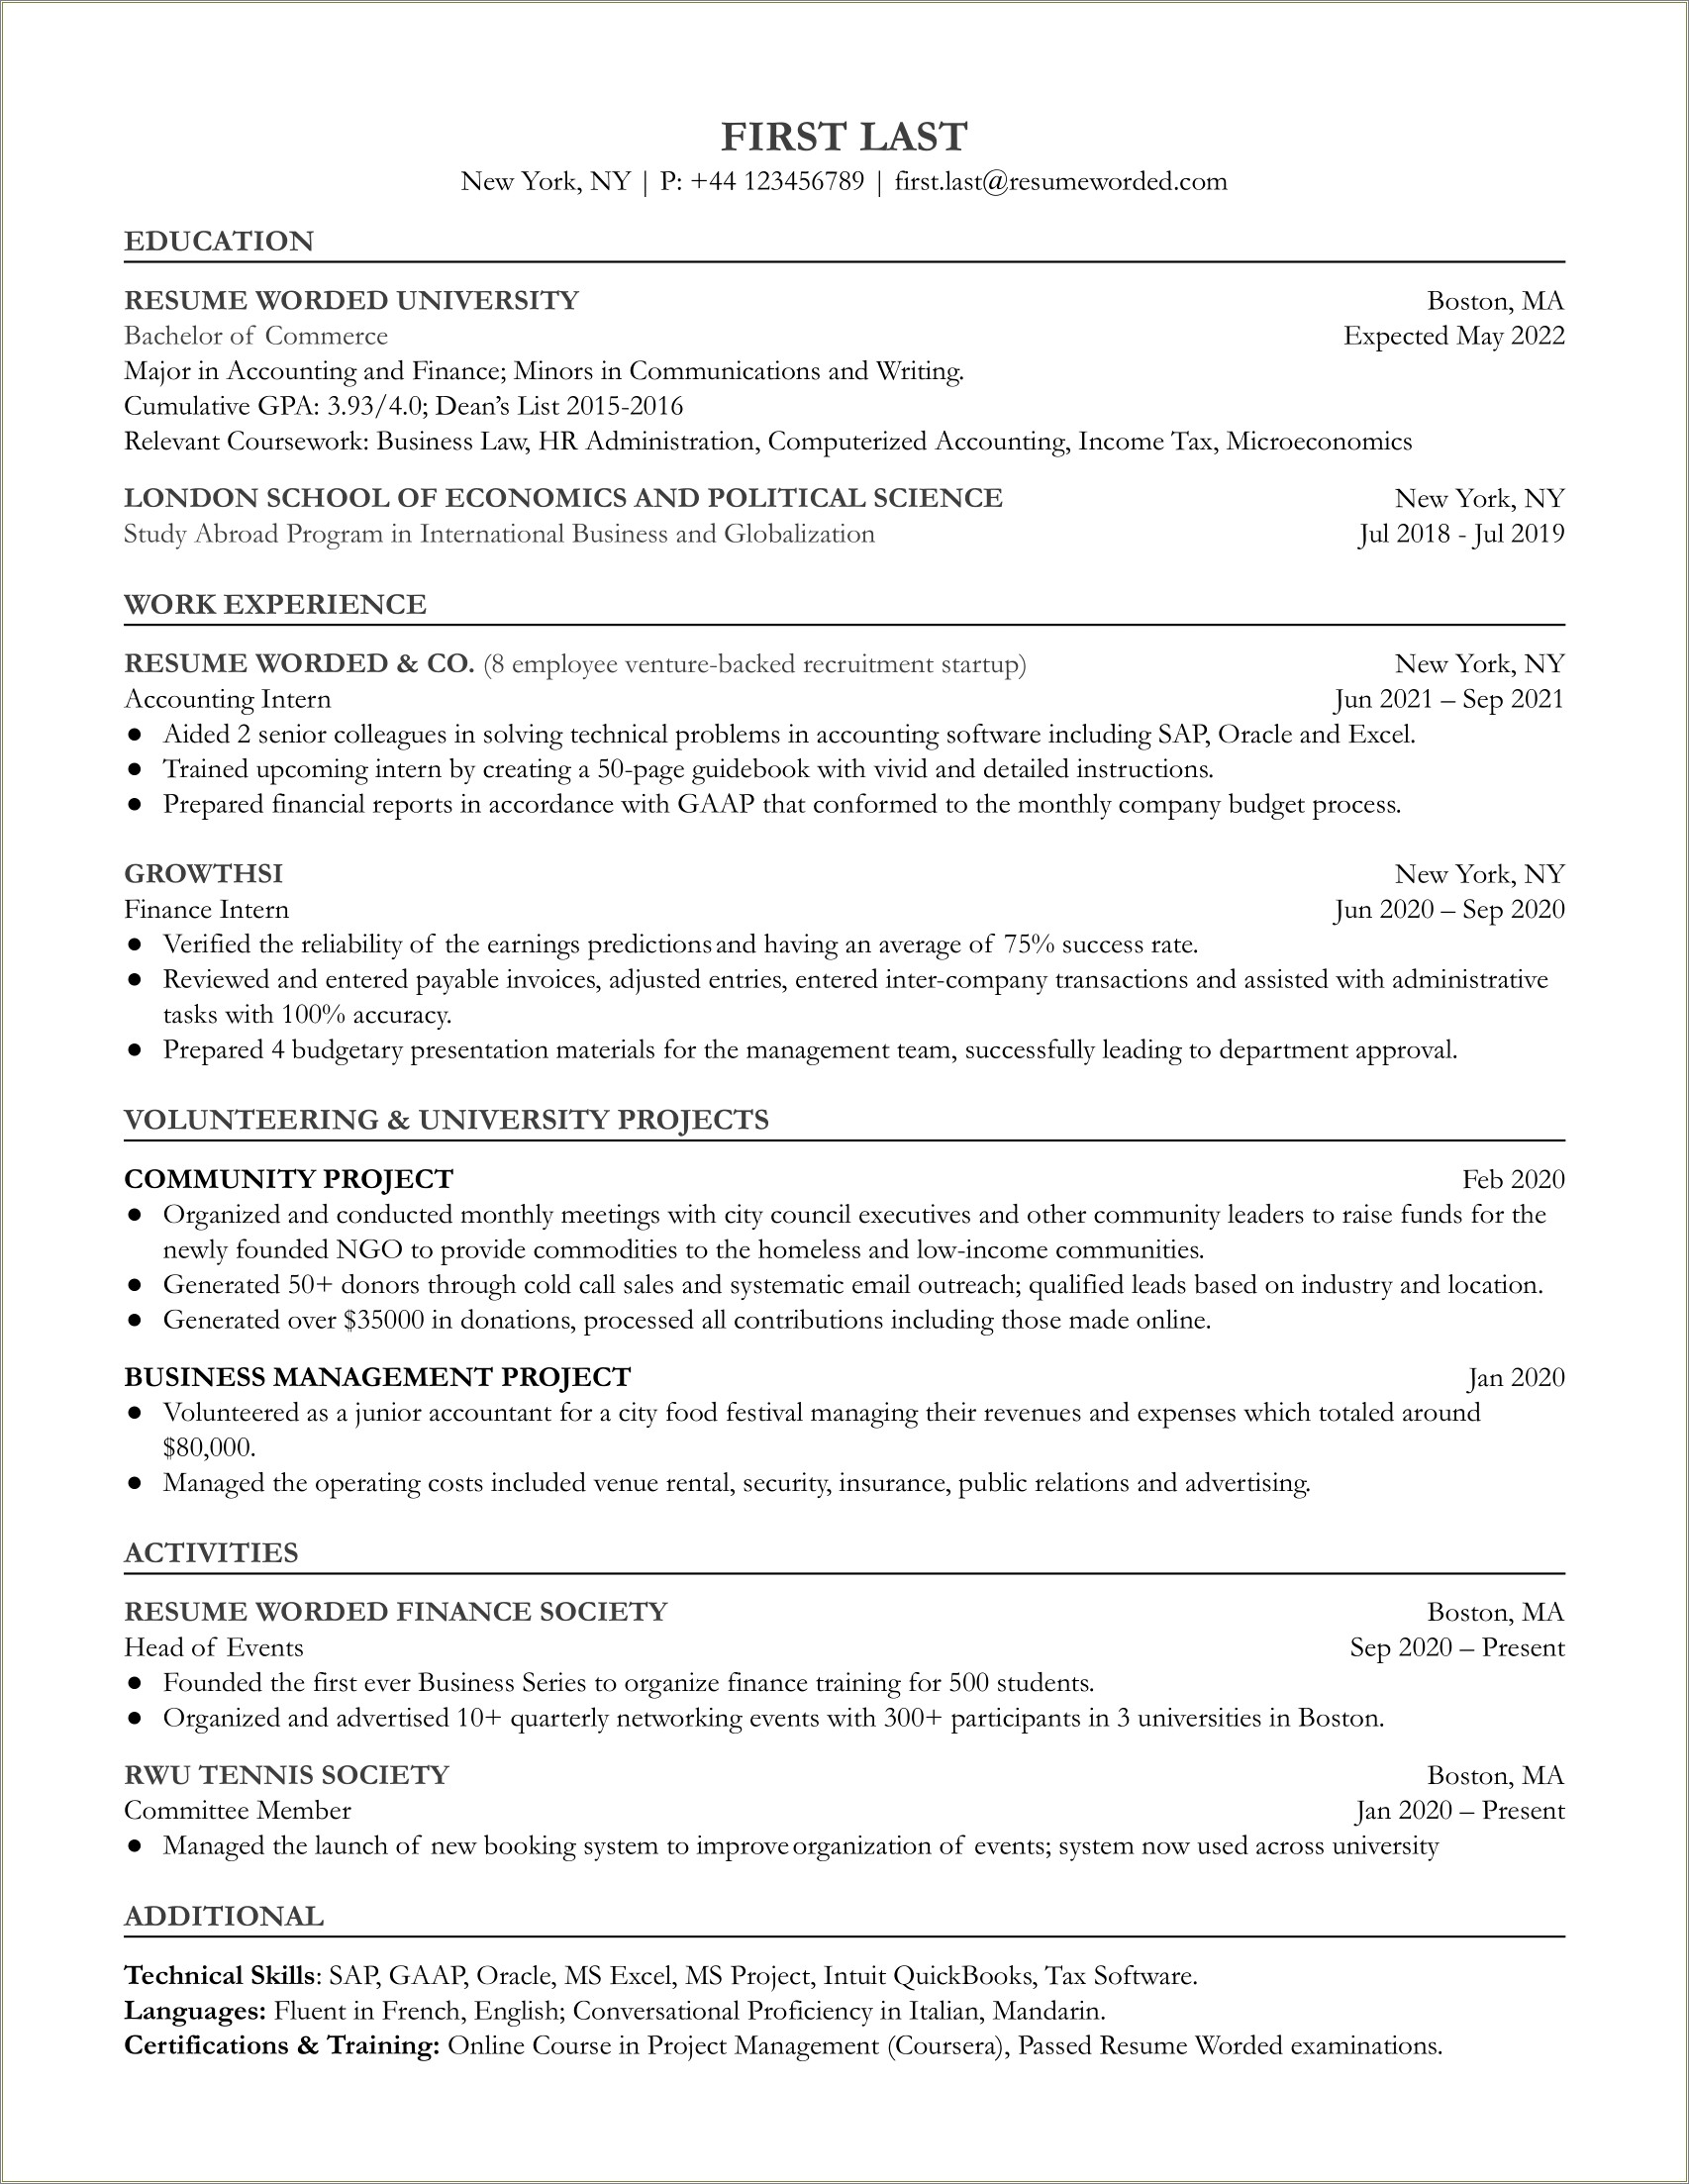 Accounts Payable And Hr Description For Resume